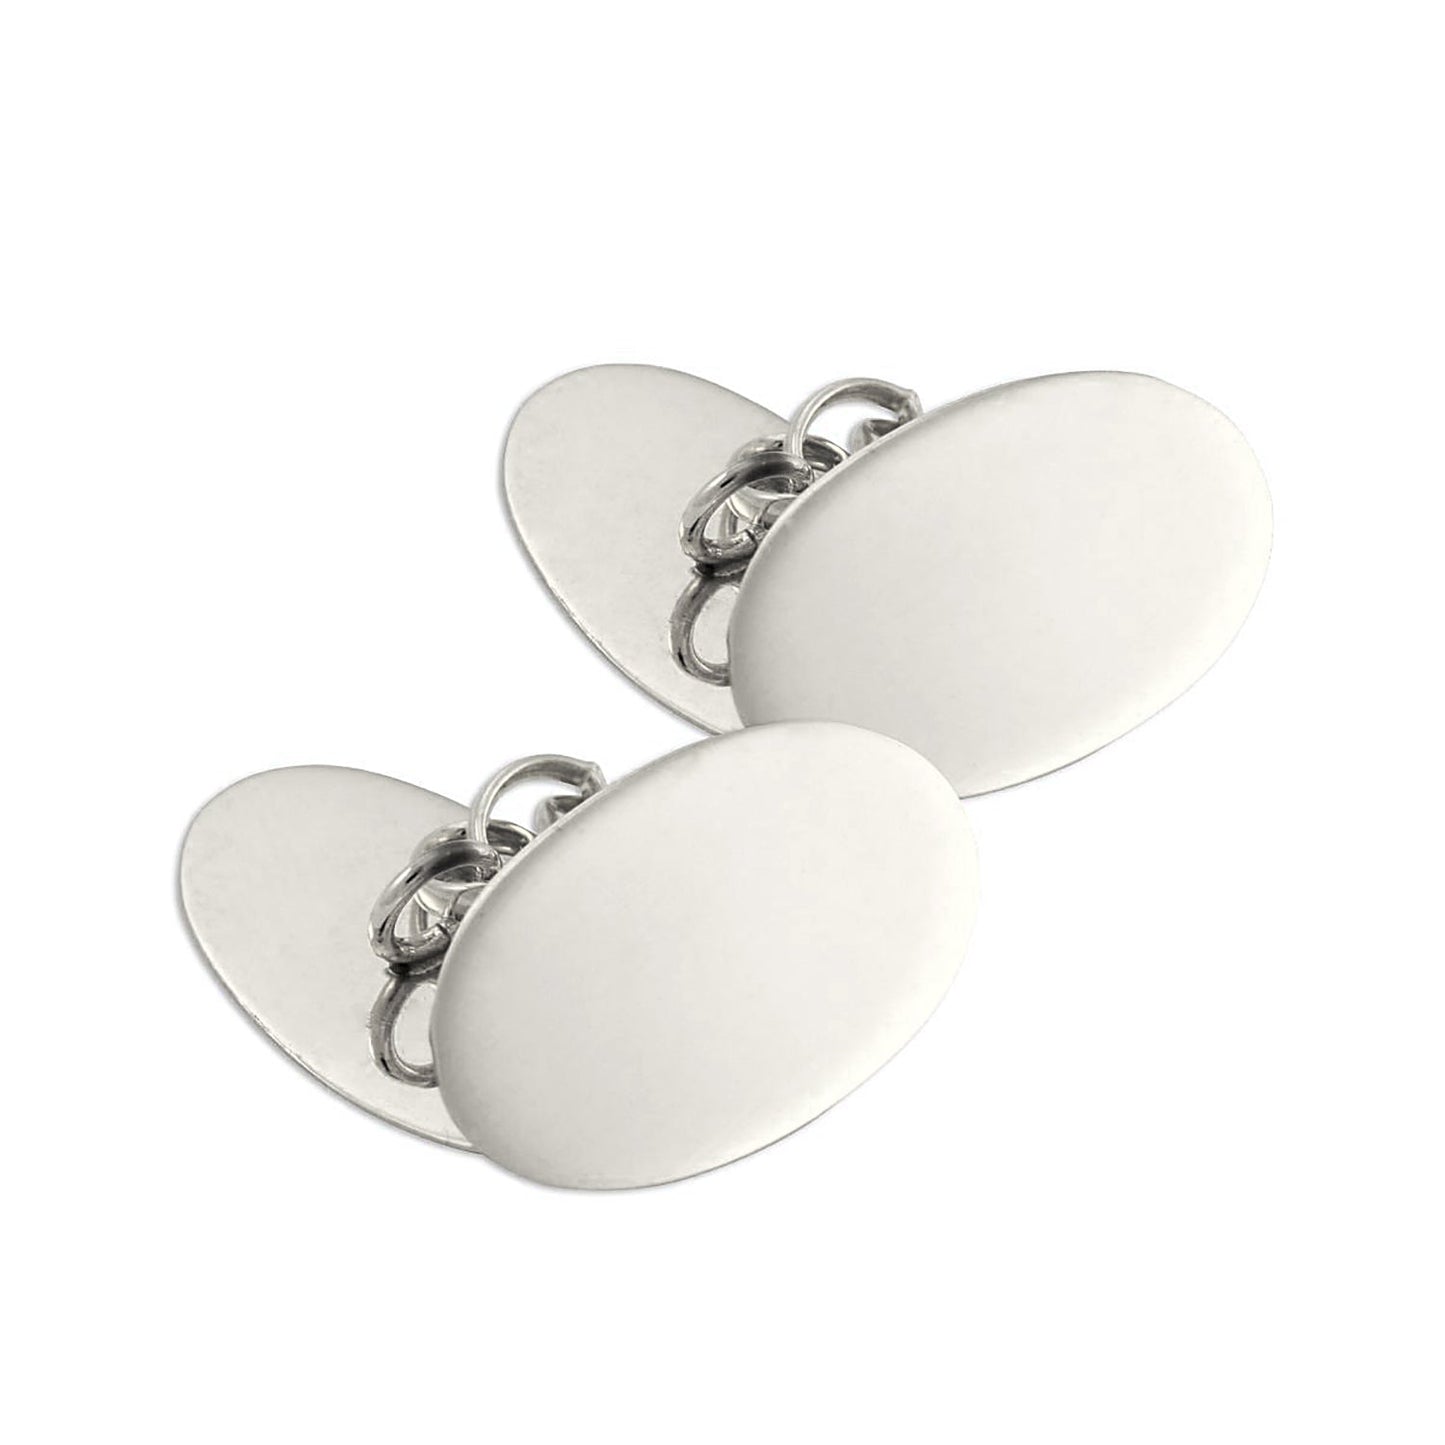 9ct White Gold Classic Oval Cufflinks